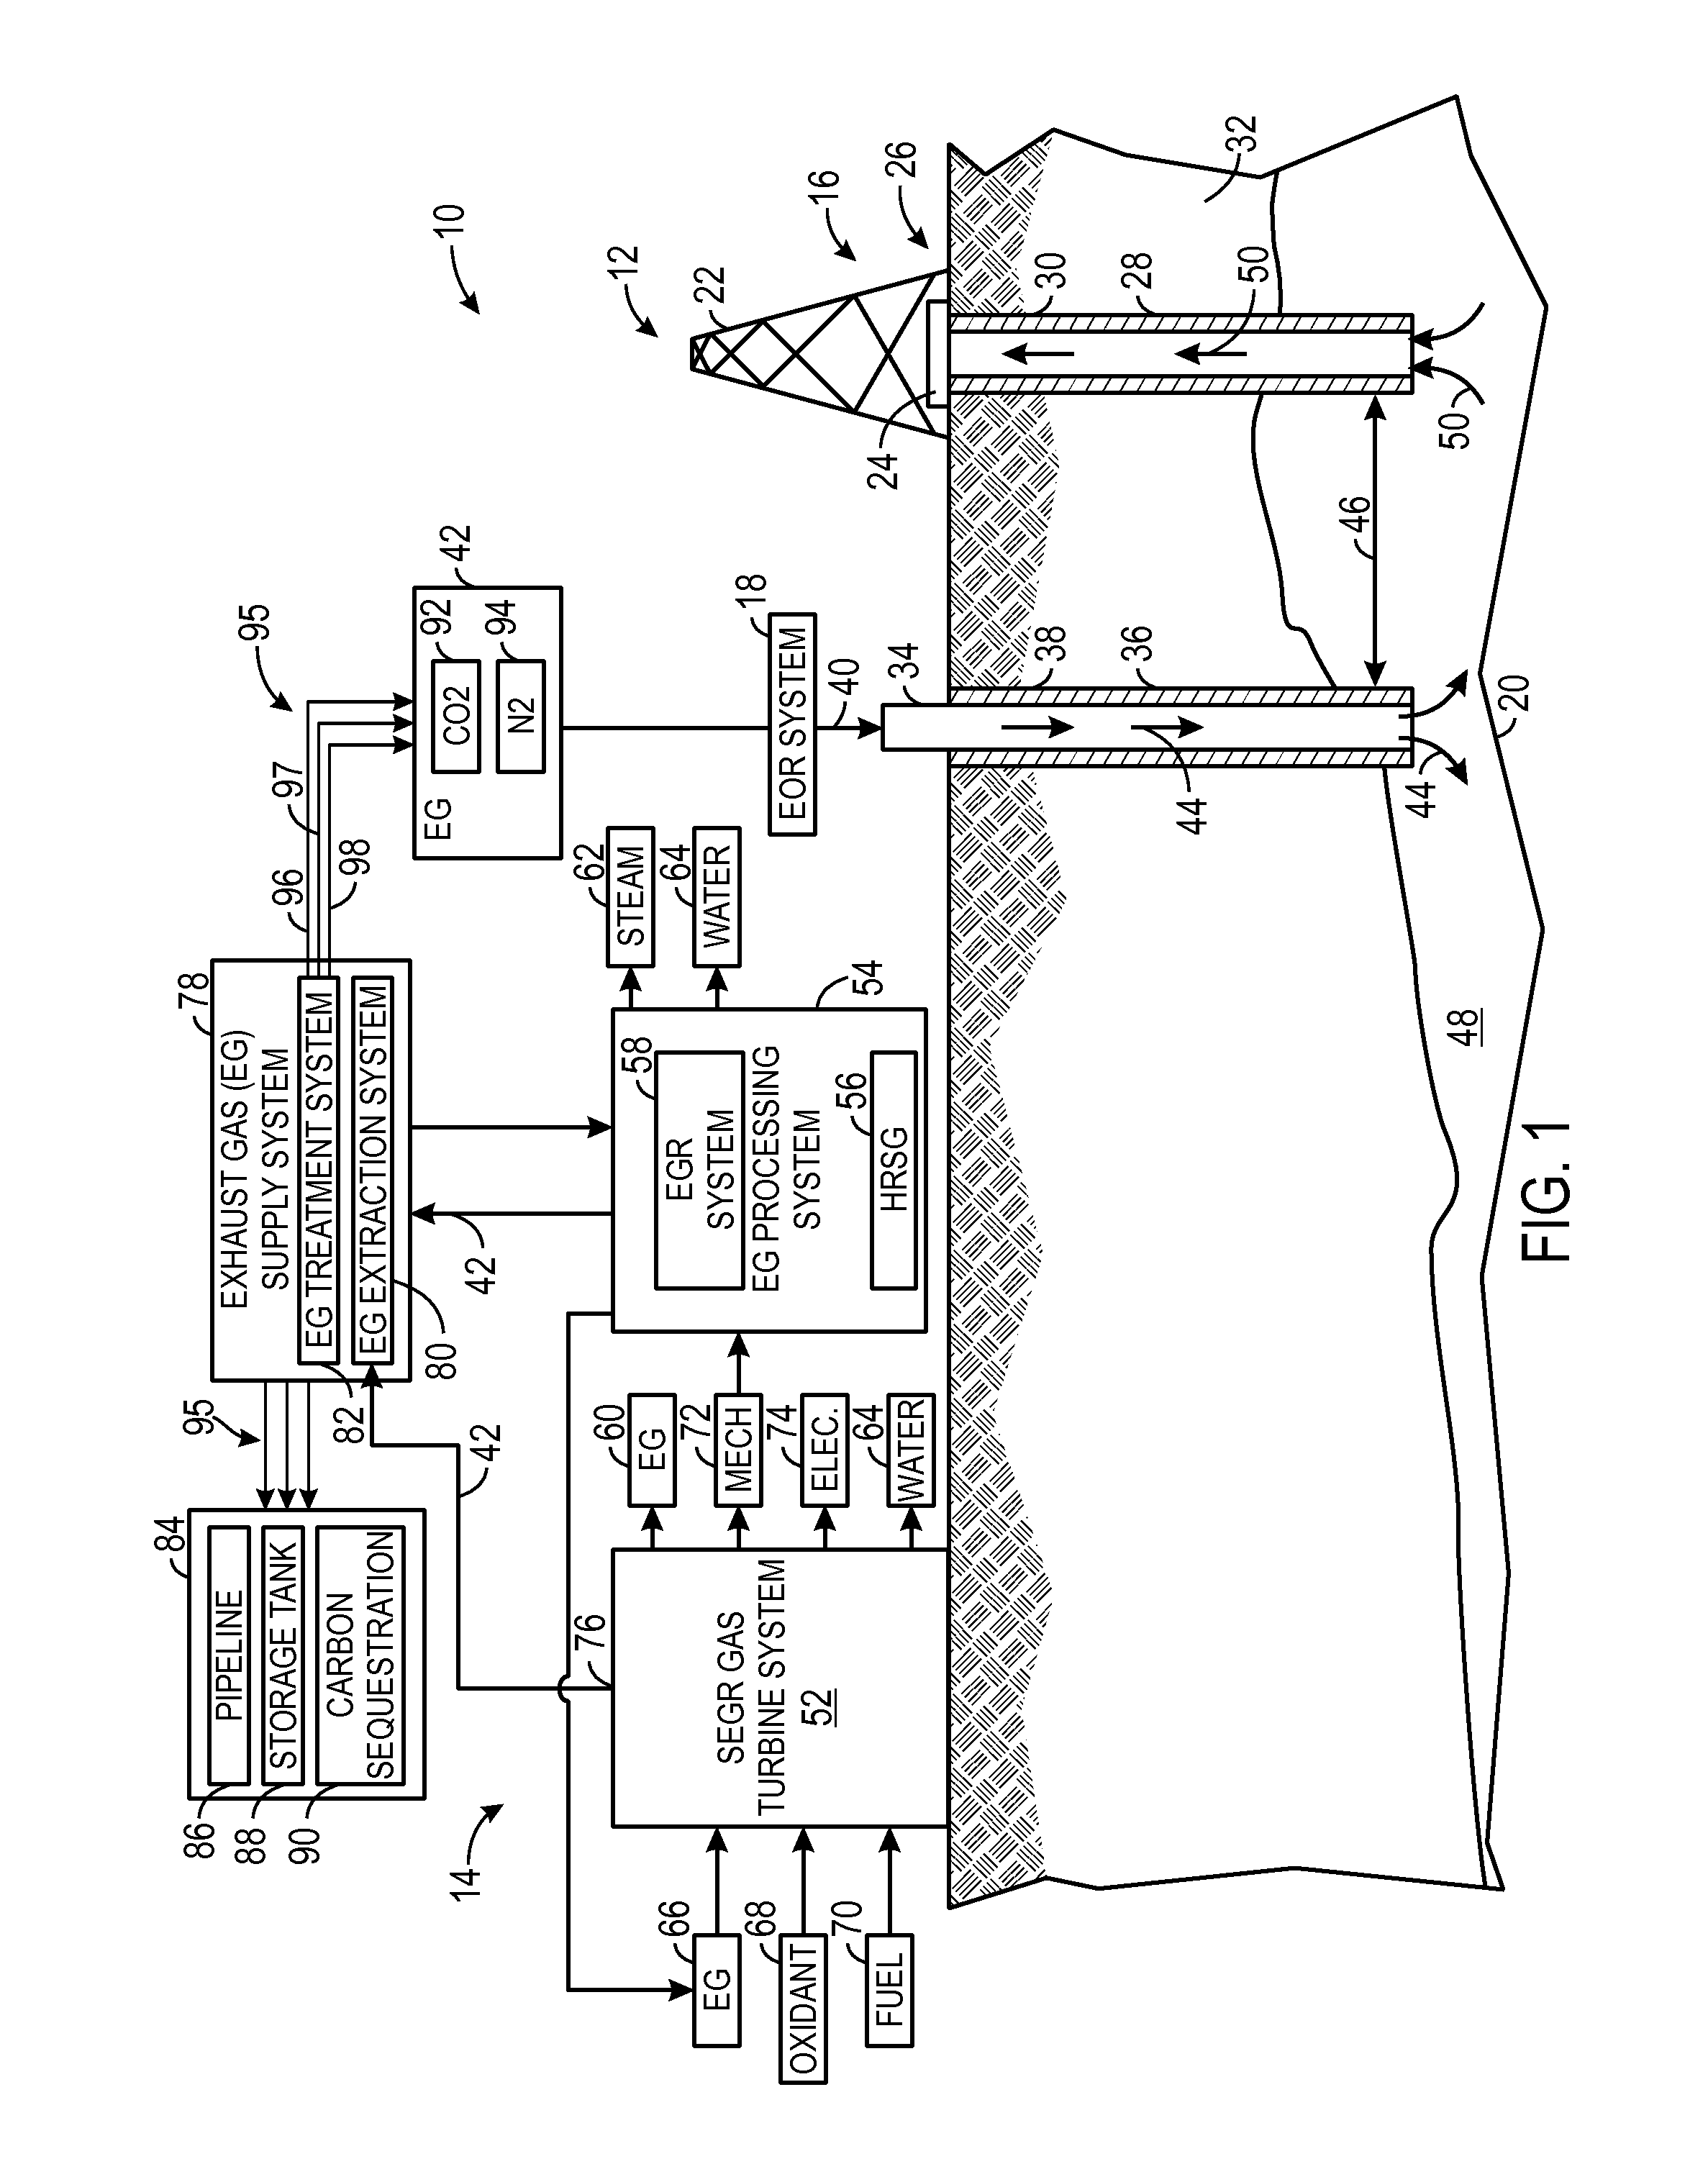 System and method for diffusion combustion in a stoichiometric exhaust gas recirculation gas turbine system